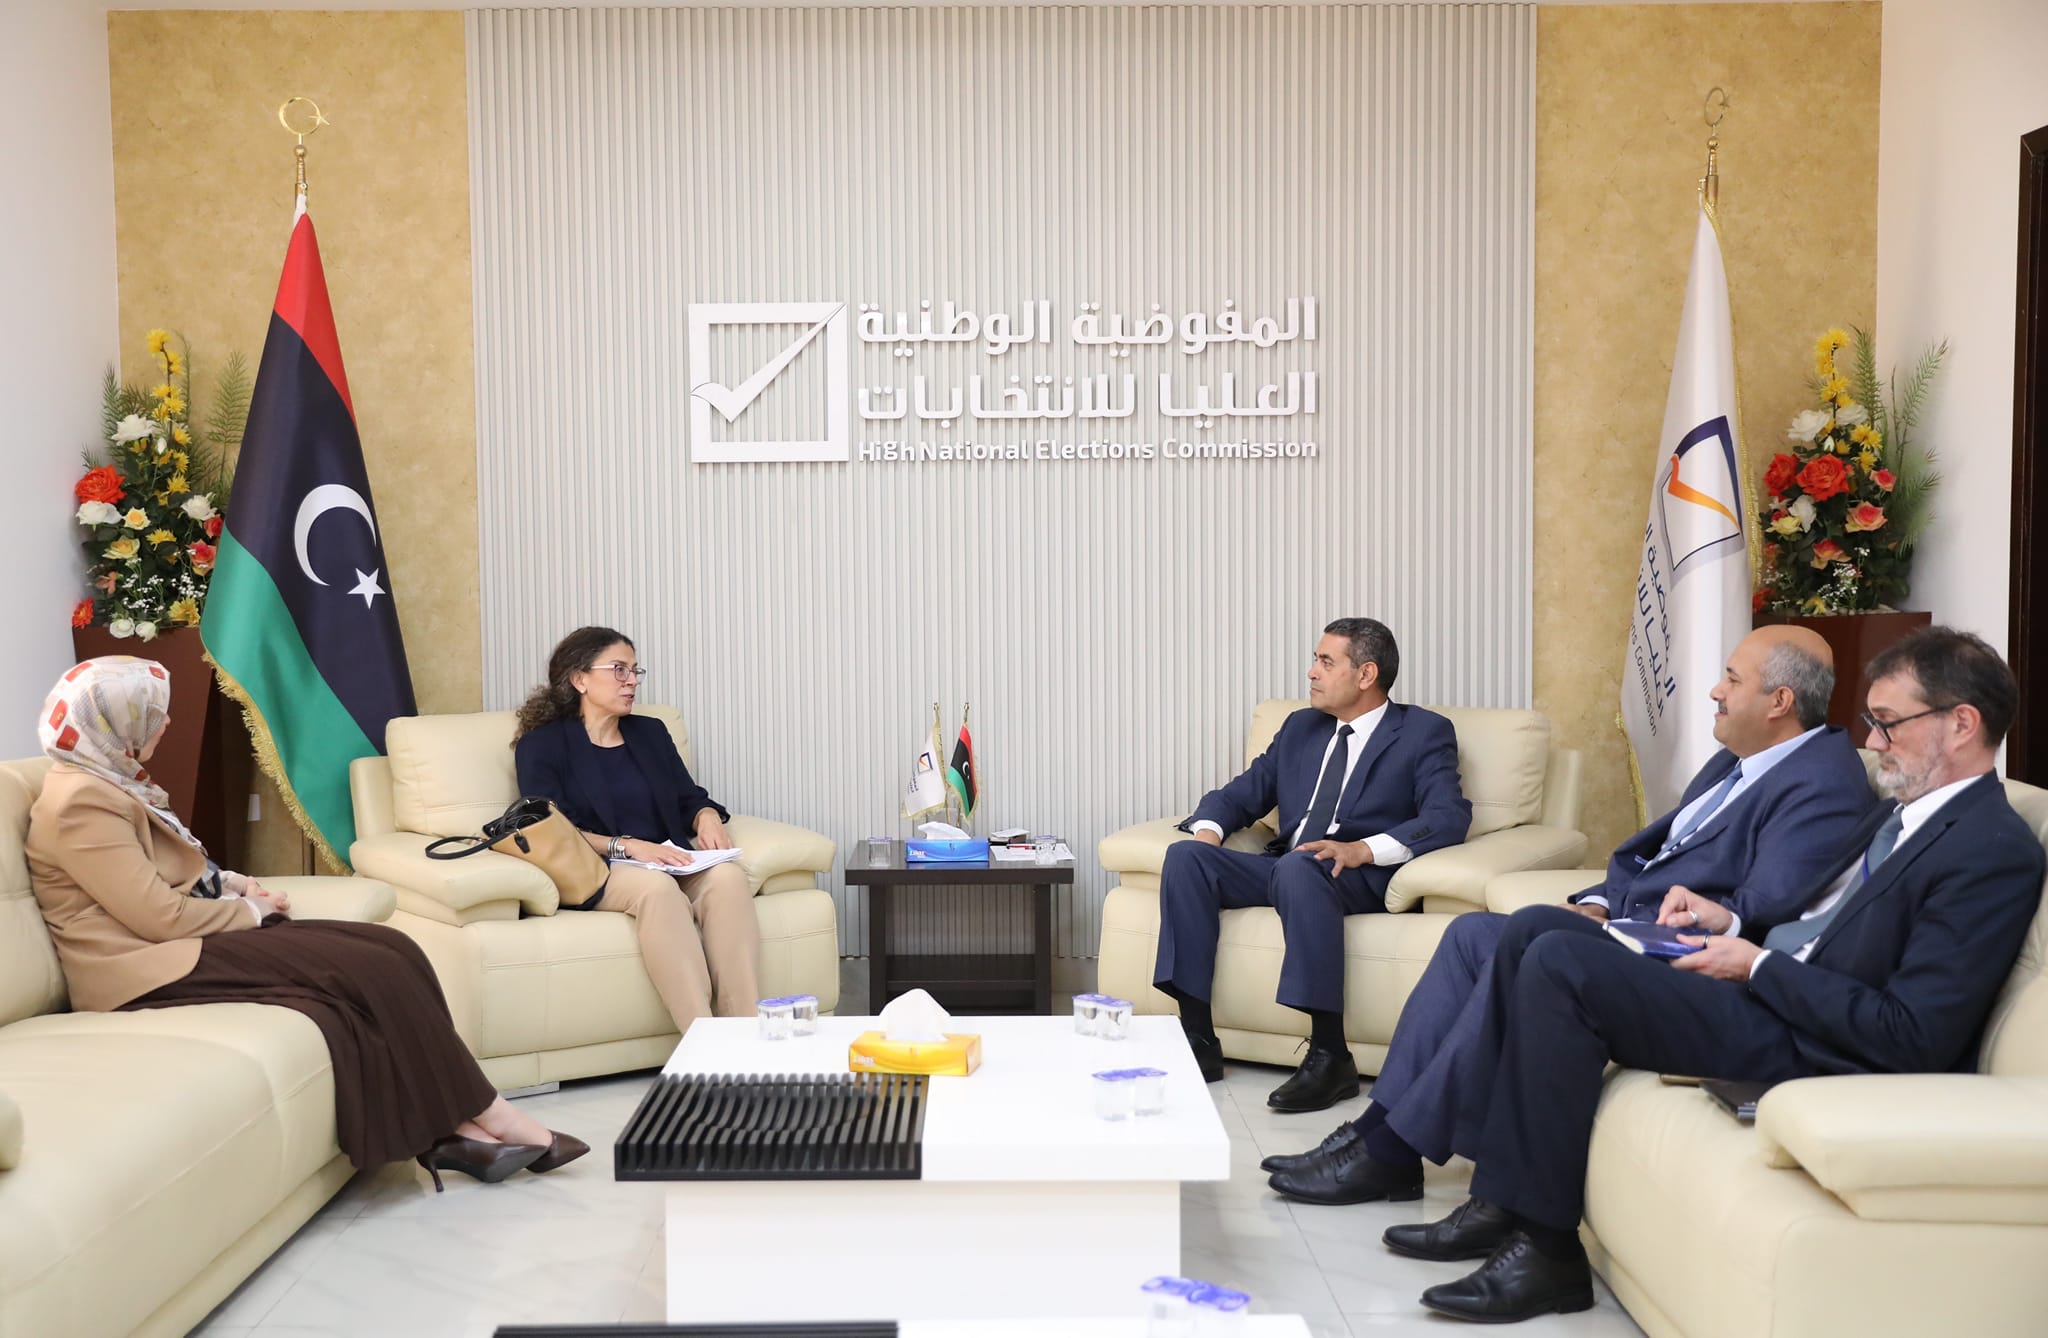 Al-Sayeh and Khoury discuss procedures related to municipal council elections.